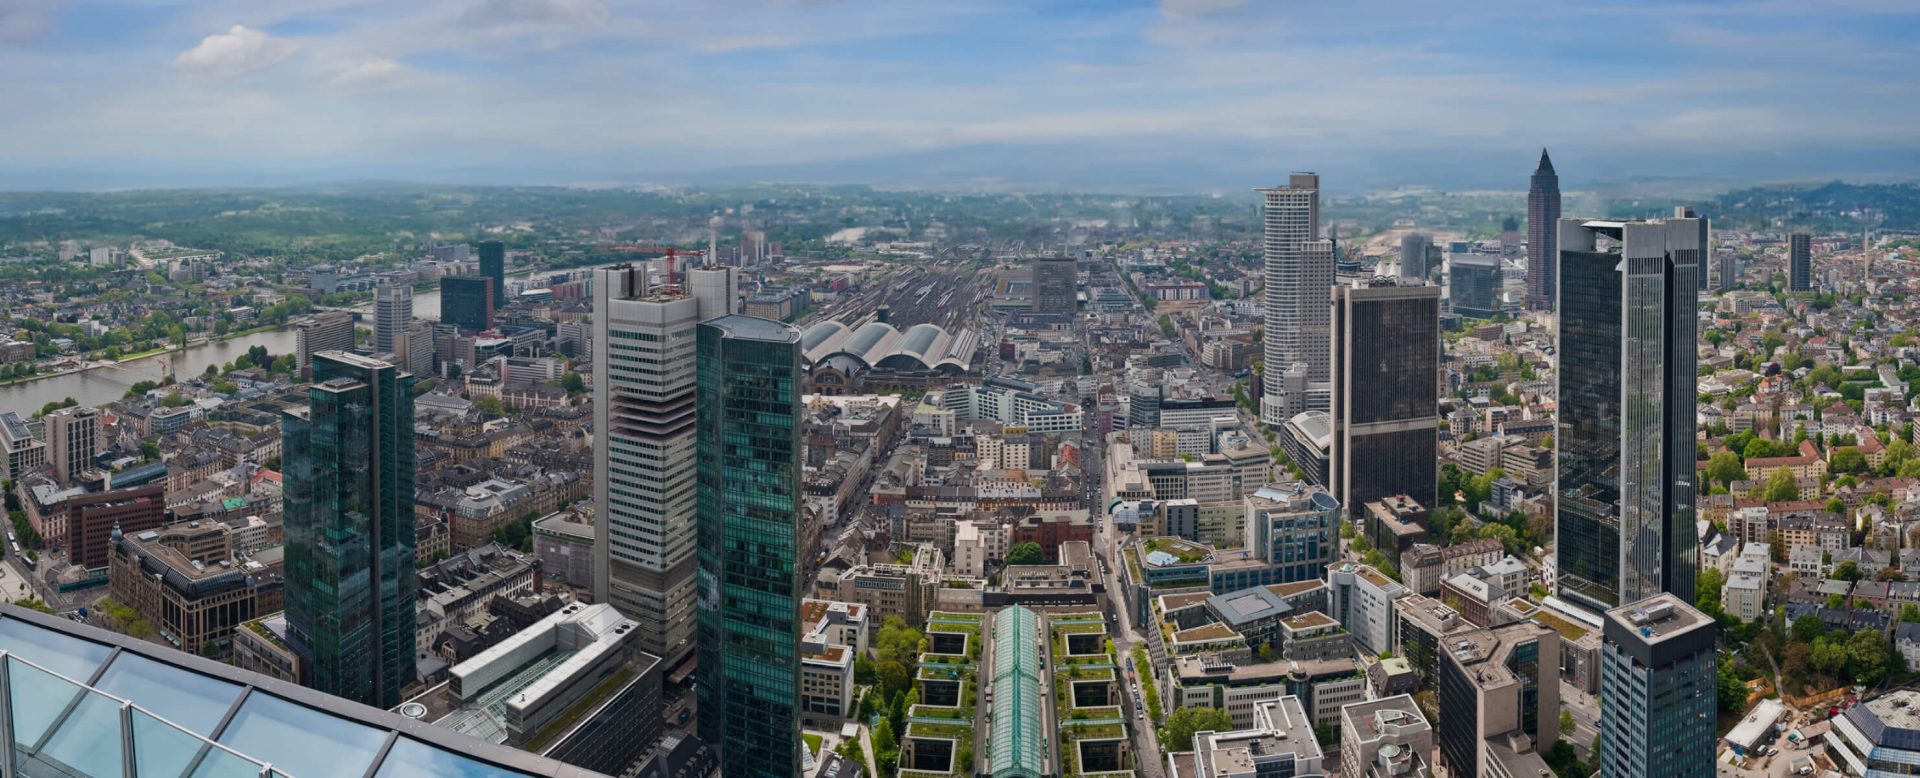 A view from a skyscraper onto the skyline of Frankfurt am Main, home to the banking institutions of the DZ BANK Group